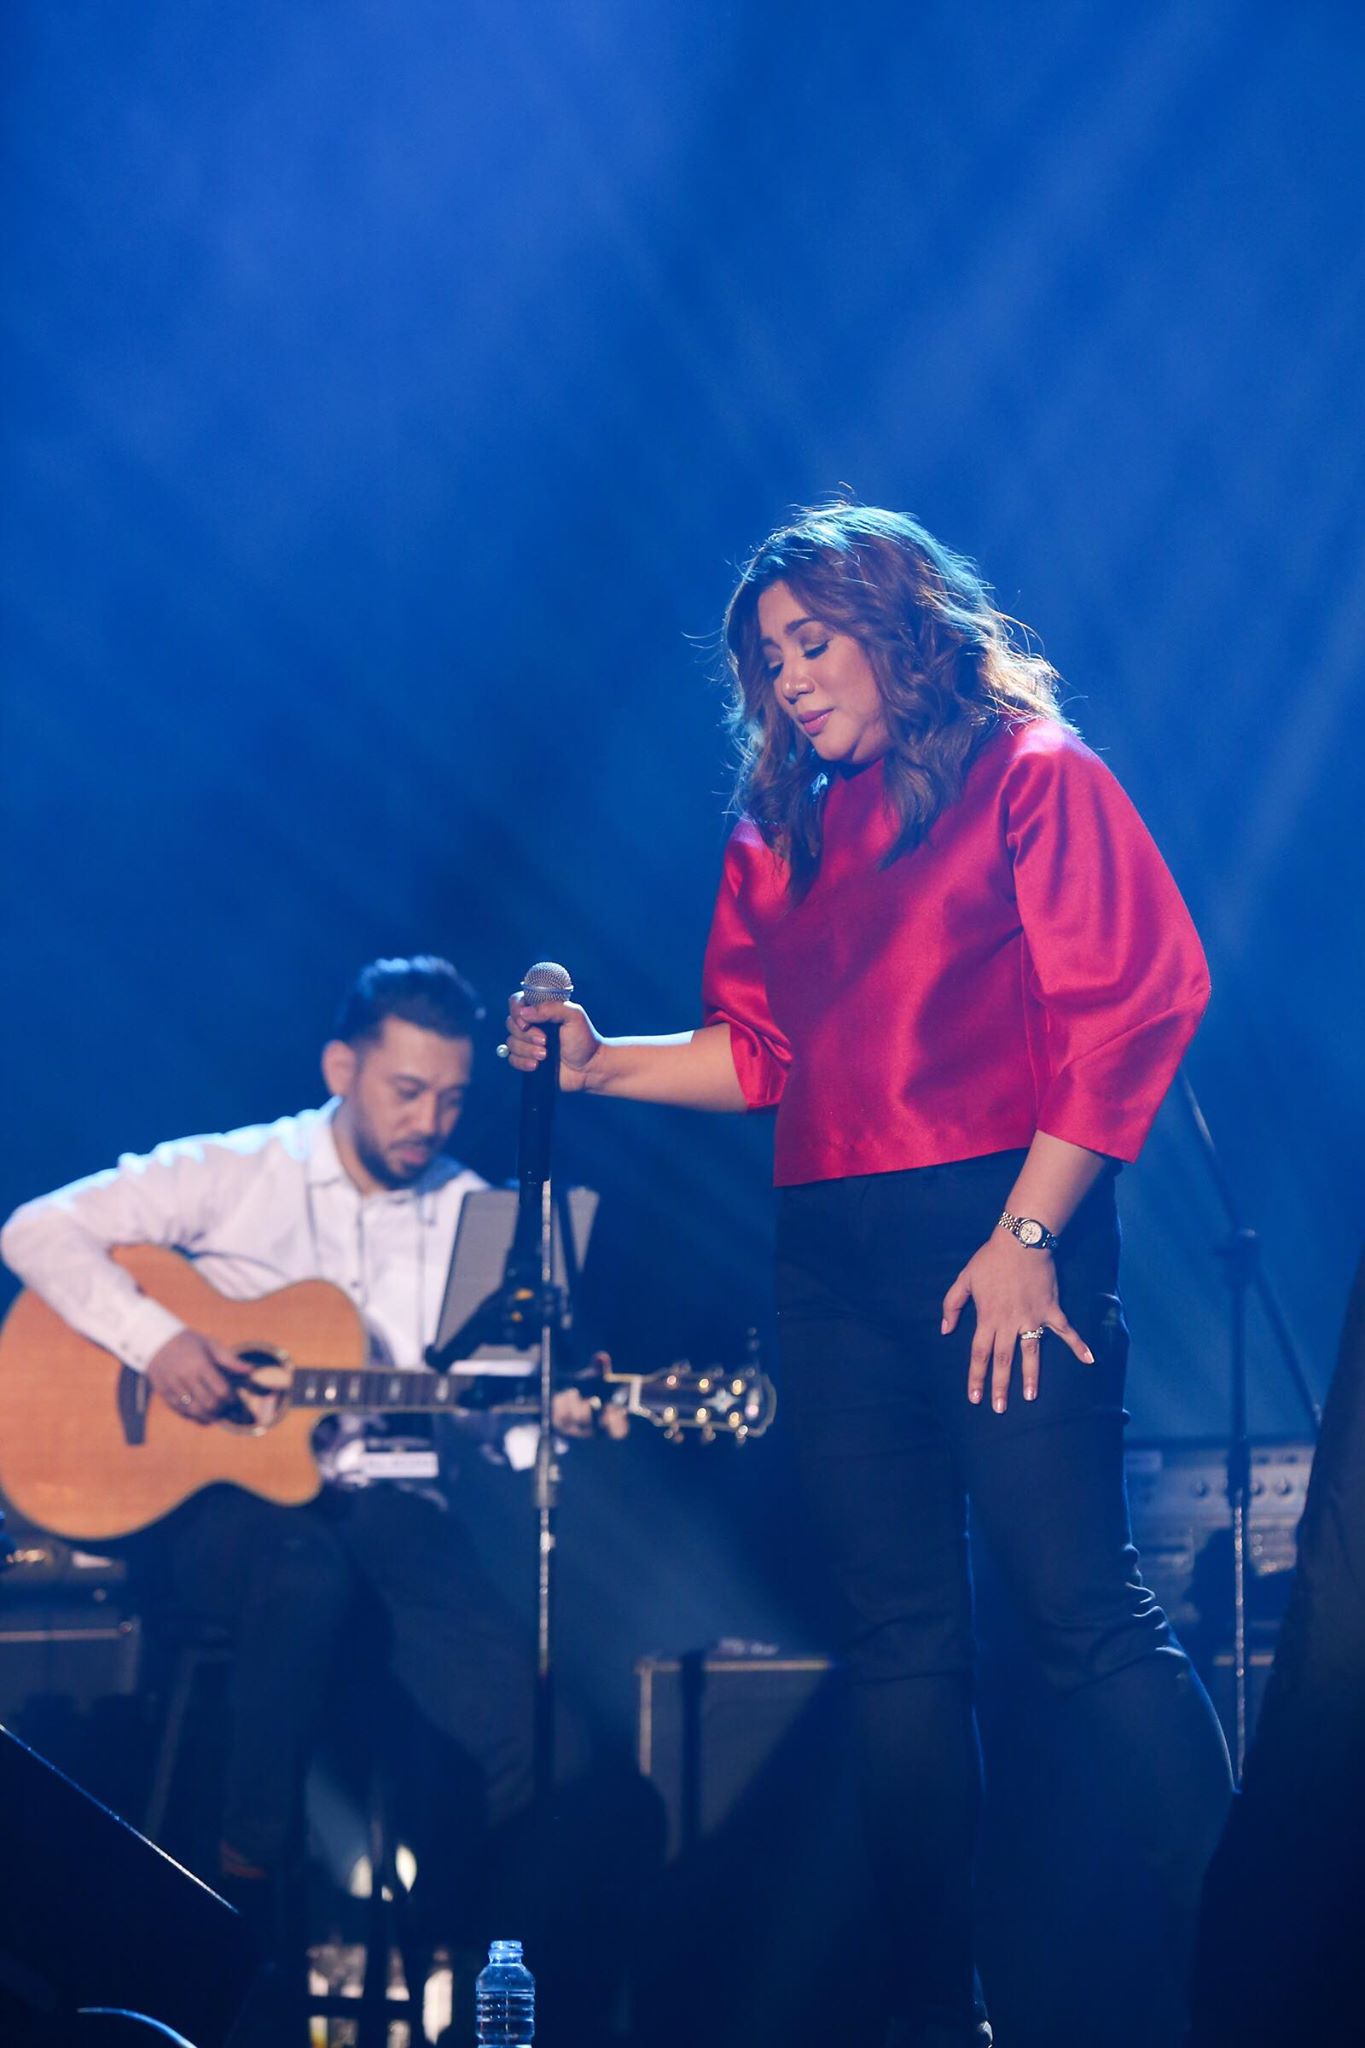 Faith Cuneta opens for Michael Learns to Rock with Mariah Carey, Steve Perry songs